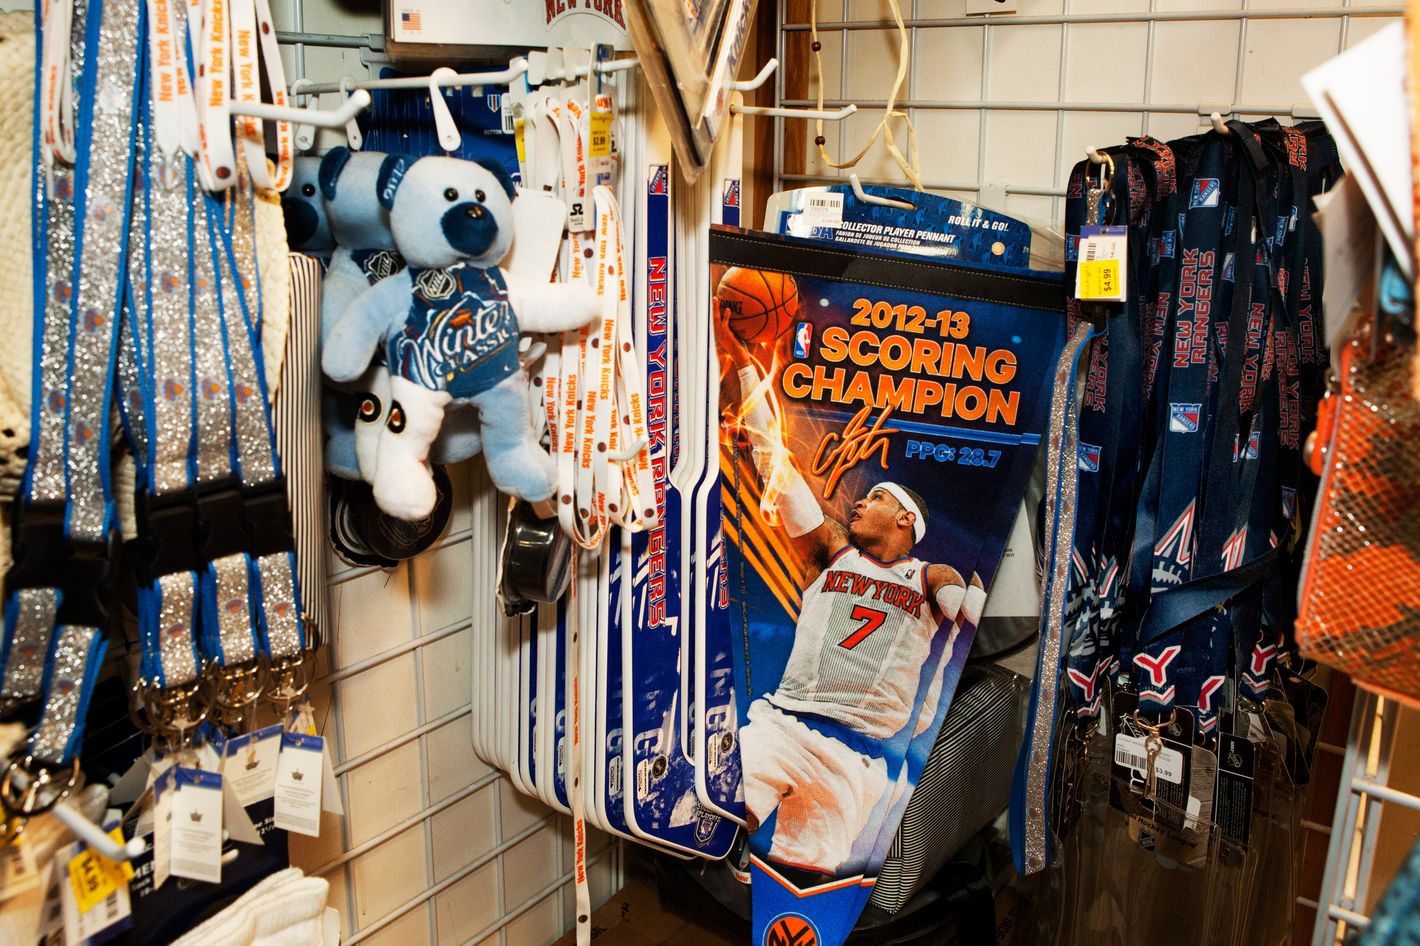 The Hoboken Shop Where Old Knicks Jerseys Go to Die